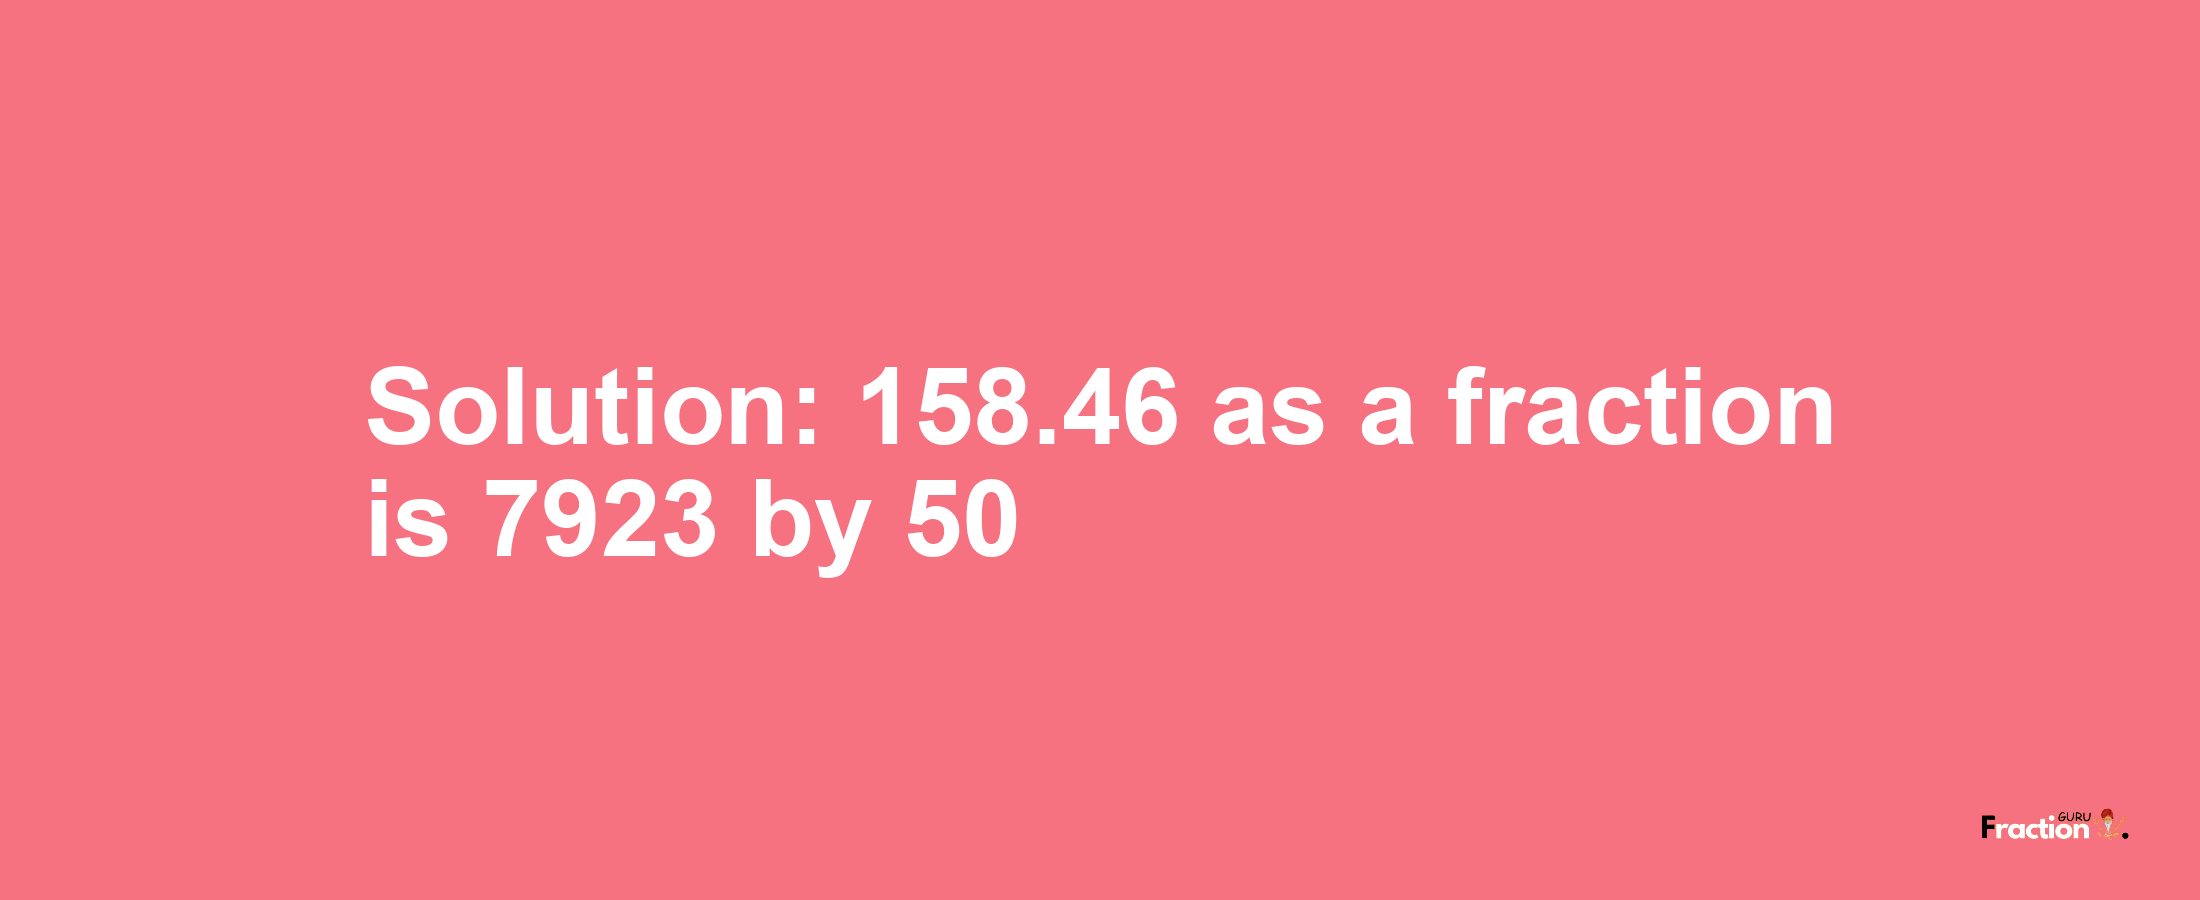 Solution:158.46 as a fraction is 7923/50